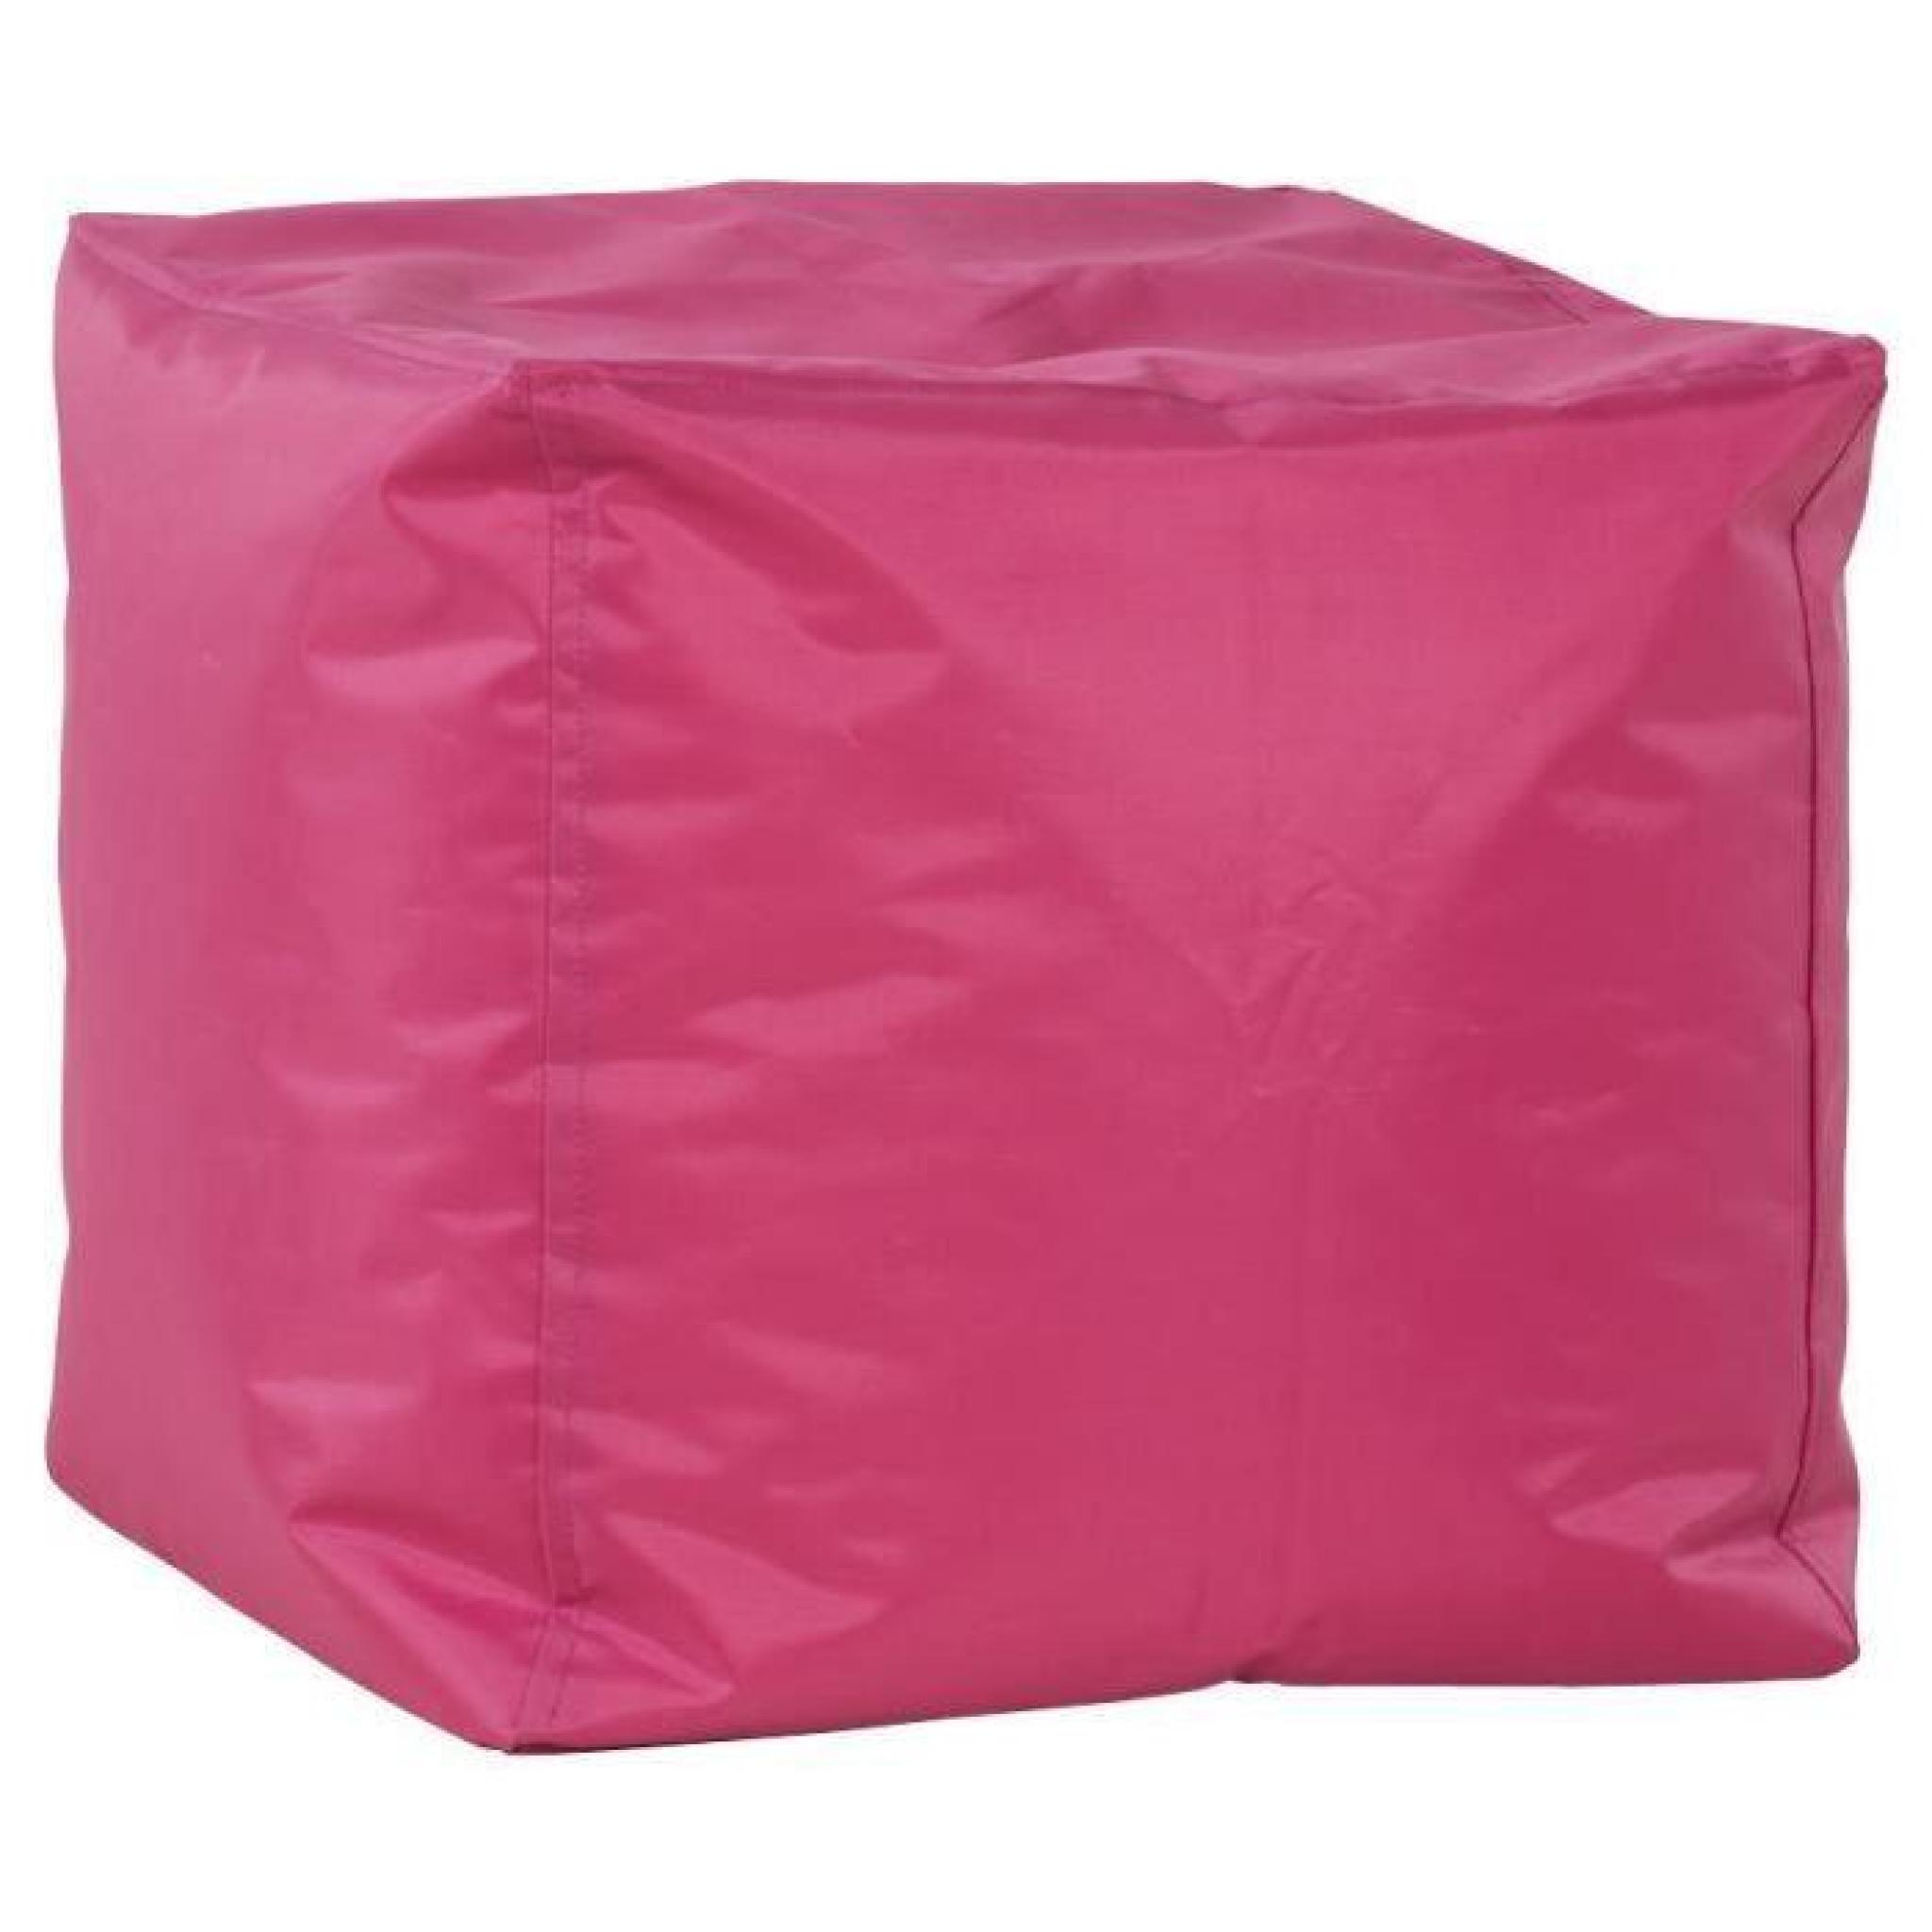 POUF D'APPOINT 'EASY' ROSE